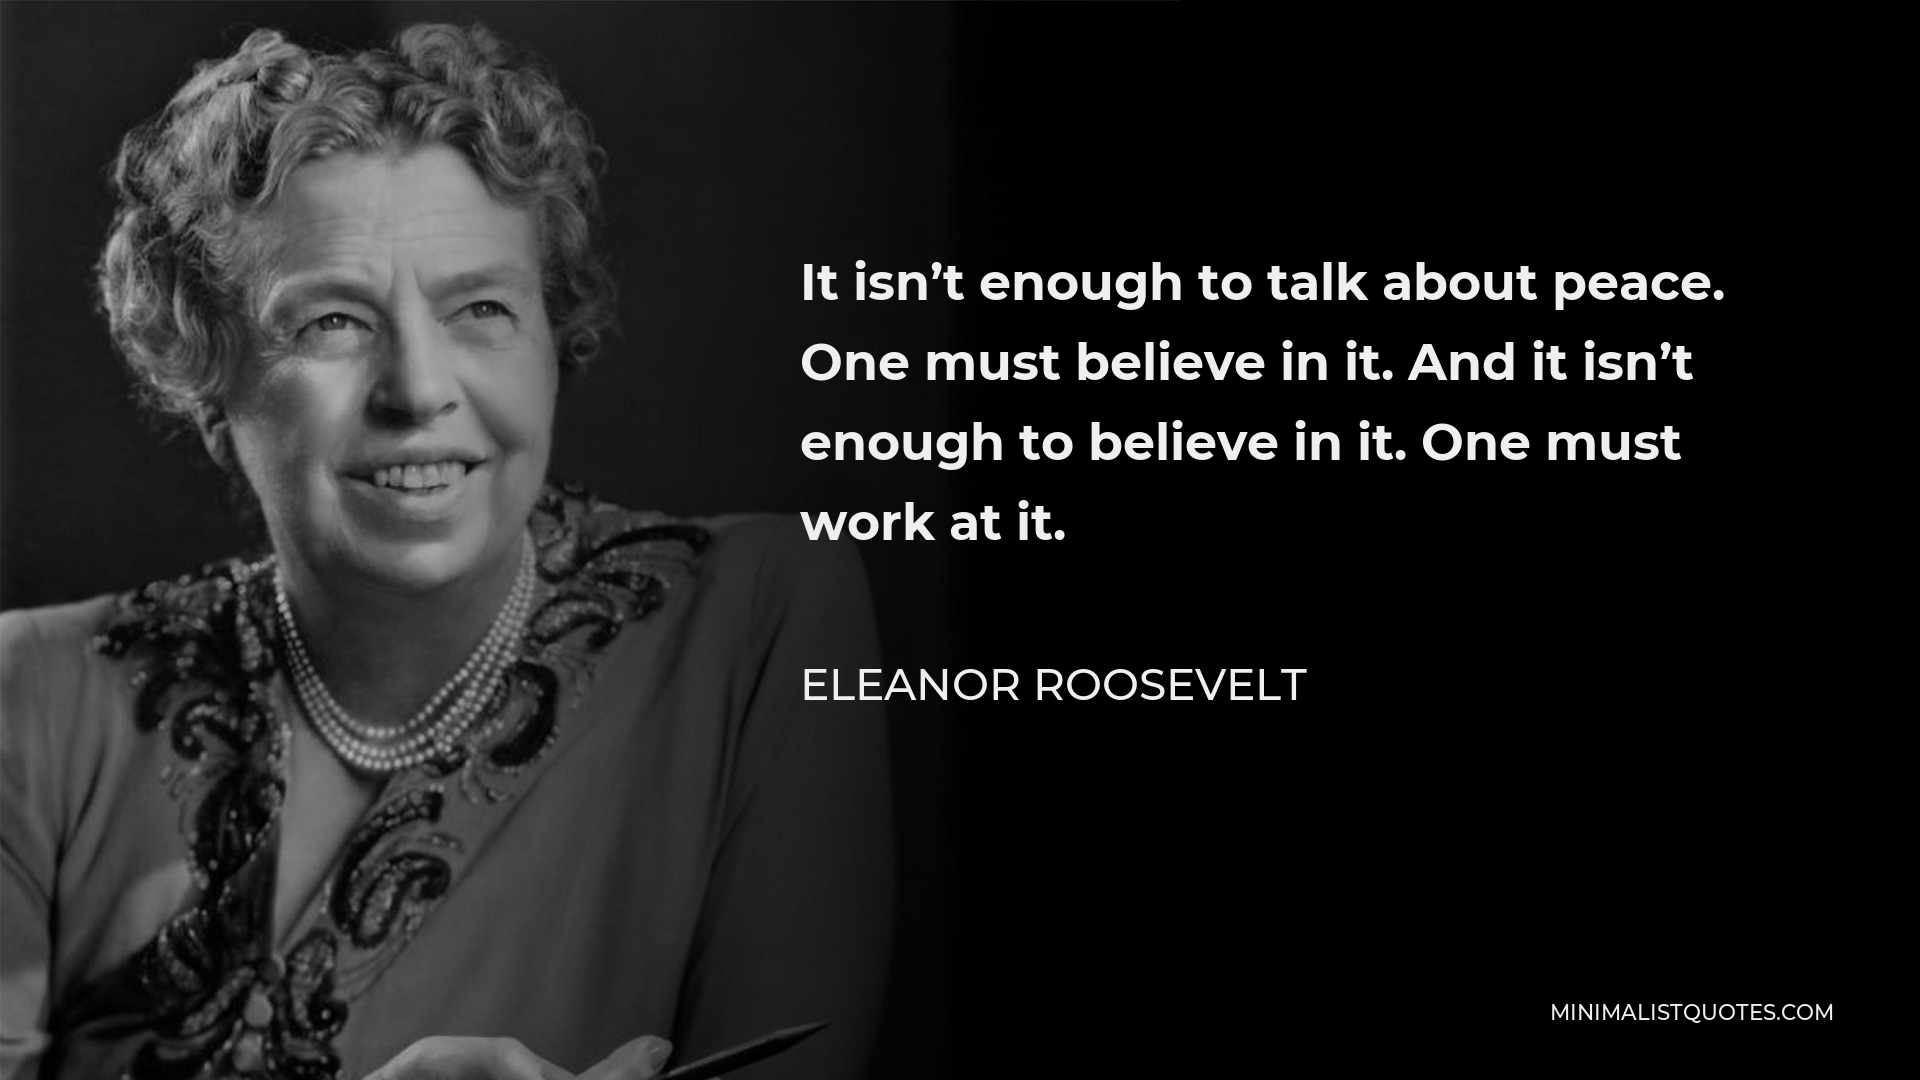 Eleanor Roosevelt Quote - It isn’t enough to talk about peace. One must believe in it. And it isn’t enough to believe in it. One must work at it.